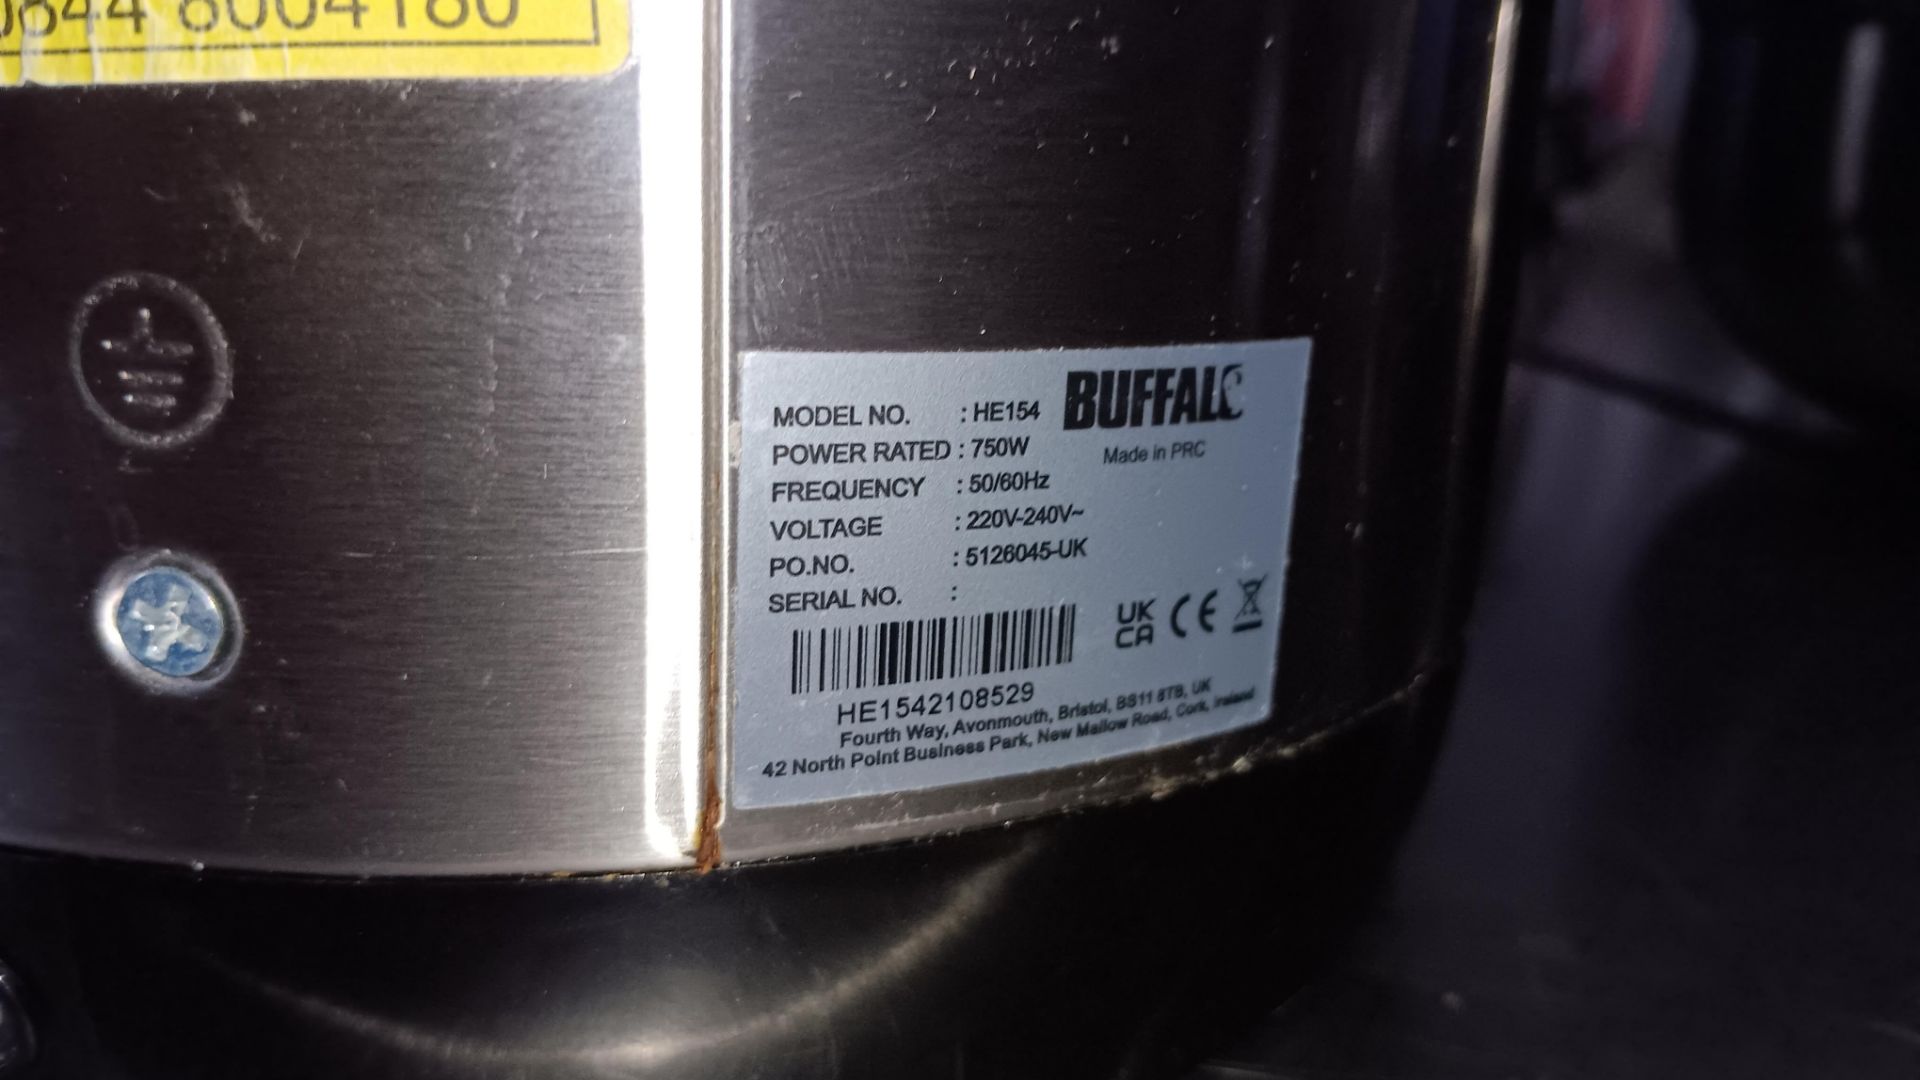 Buffalo HE154 4.7Ltr electric Airpot, Serial number HE1542108529 and Buffalo L714 Stainless steel - Image 3 of 5